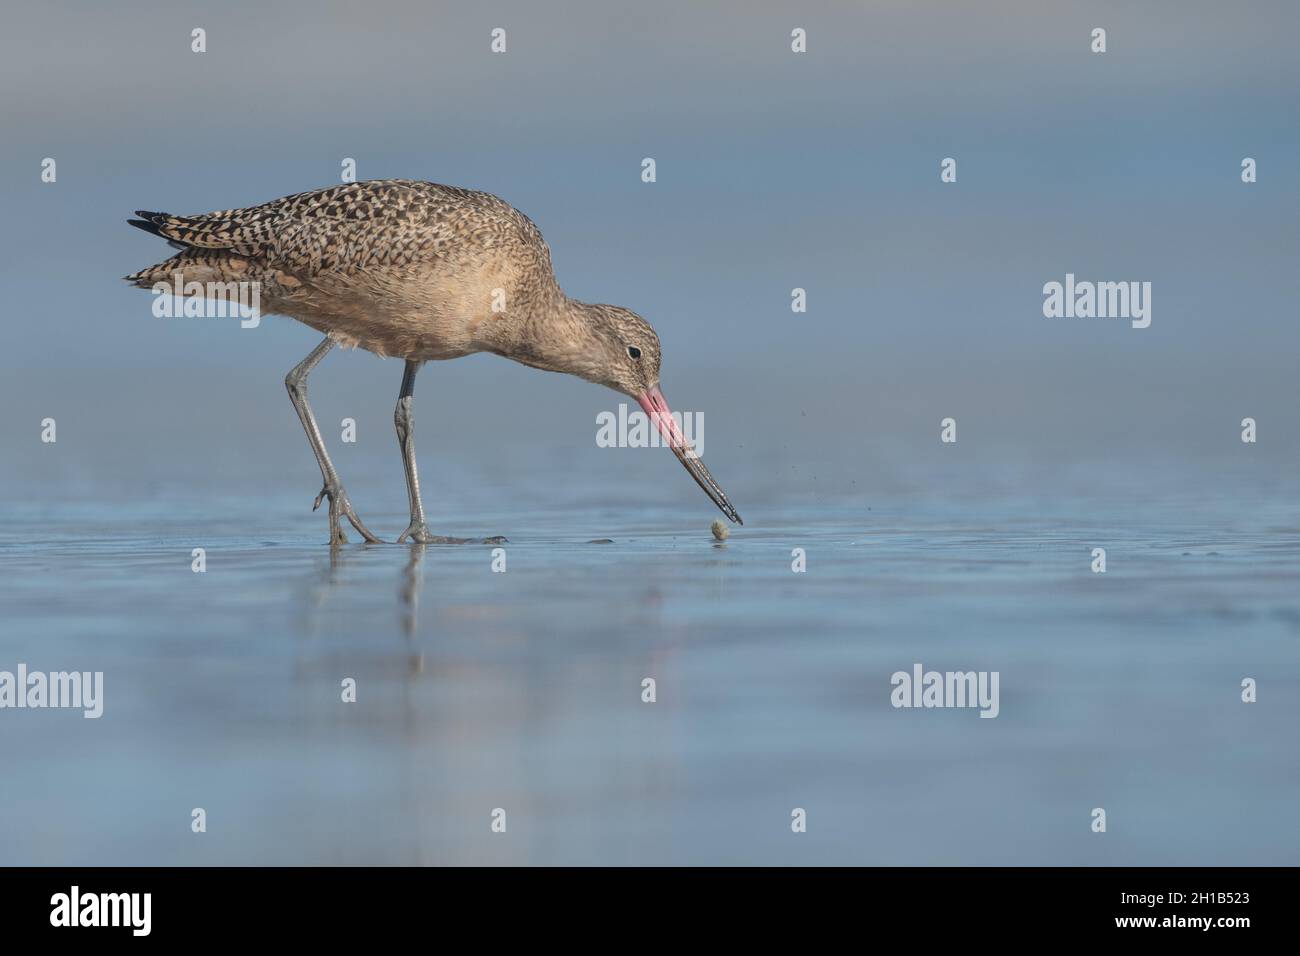 Marbled godwit (Limosa fedoa) foraging for food on a West Coast beach in Point Reyes National Seashore in Marin county, California. Stock Photo